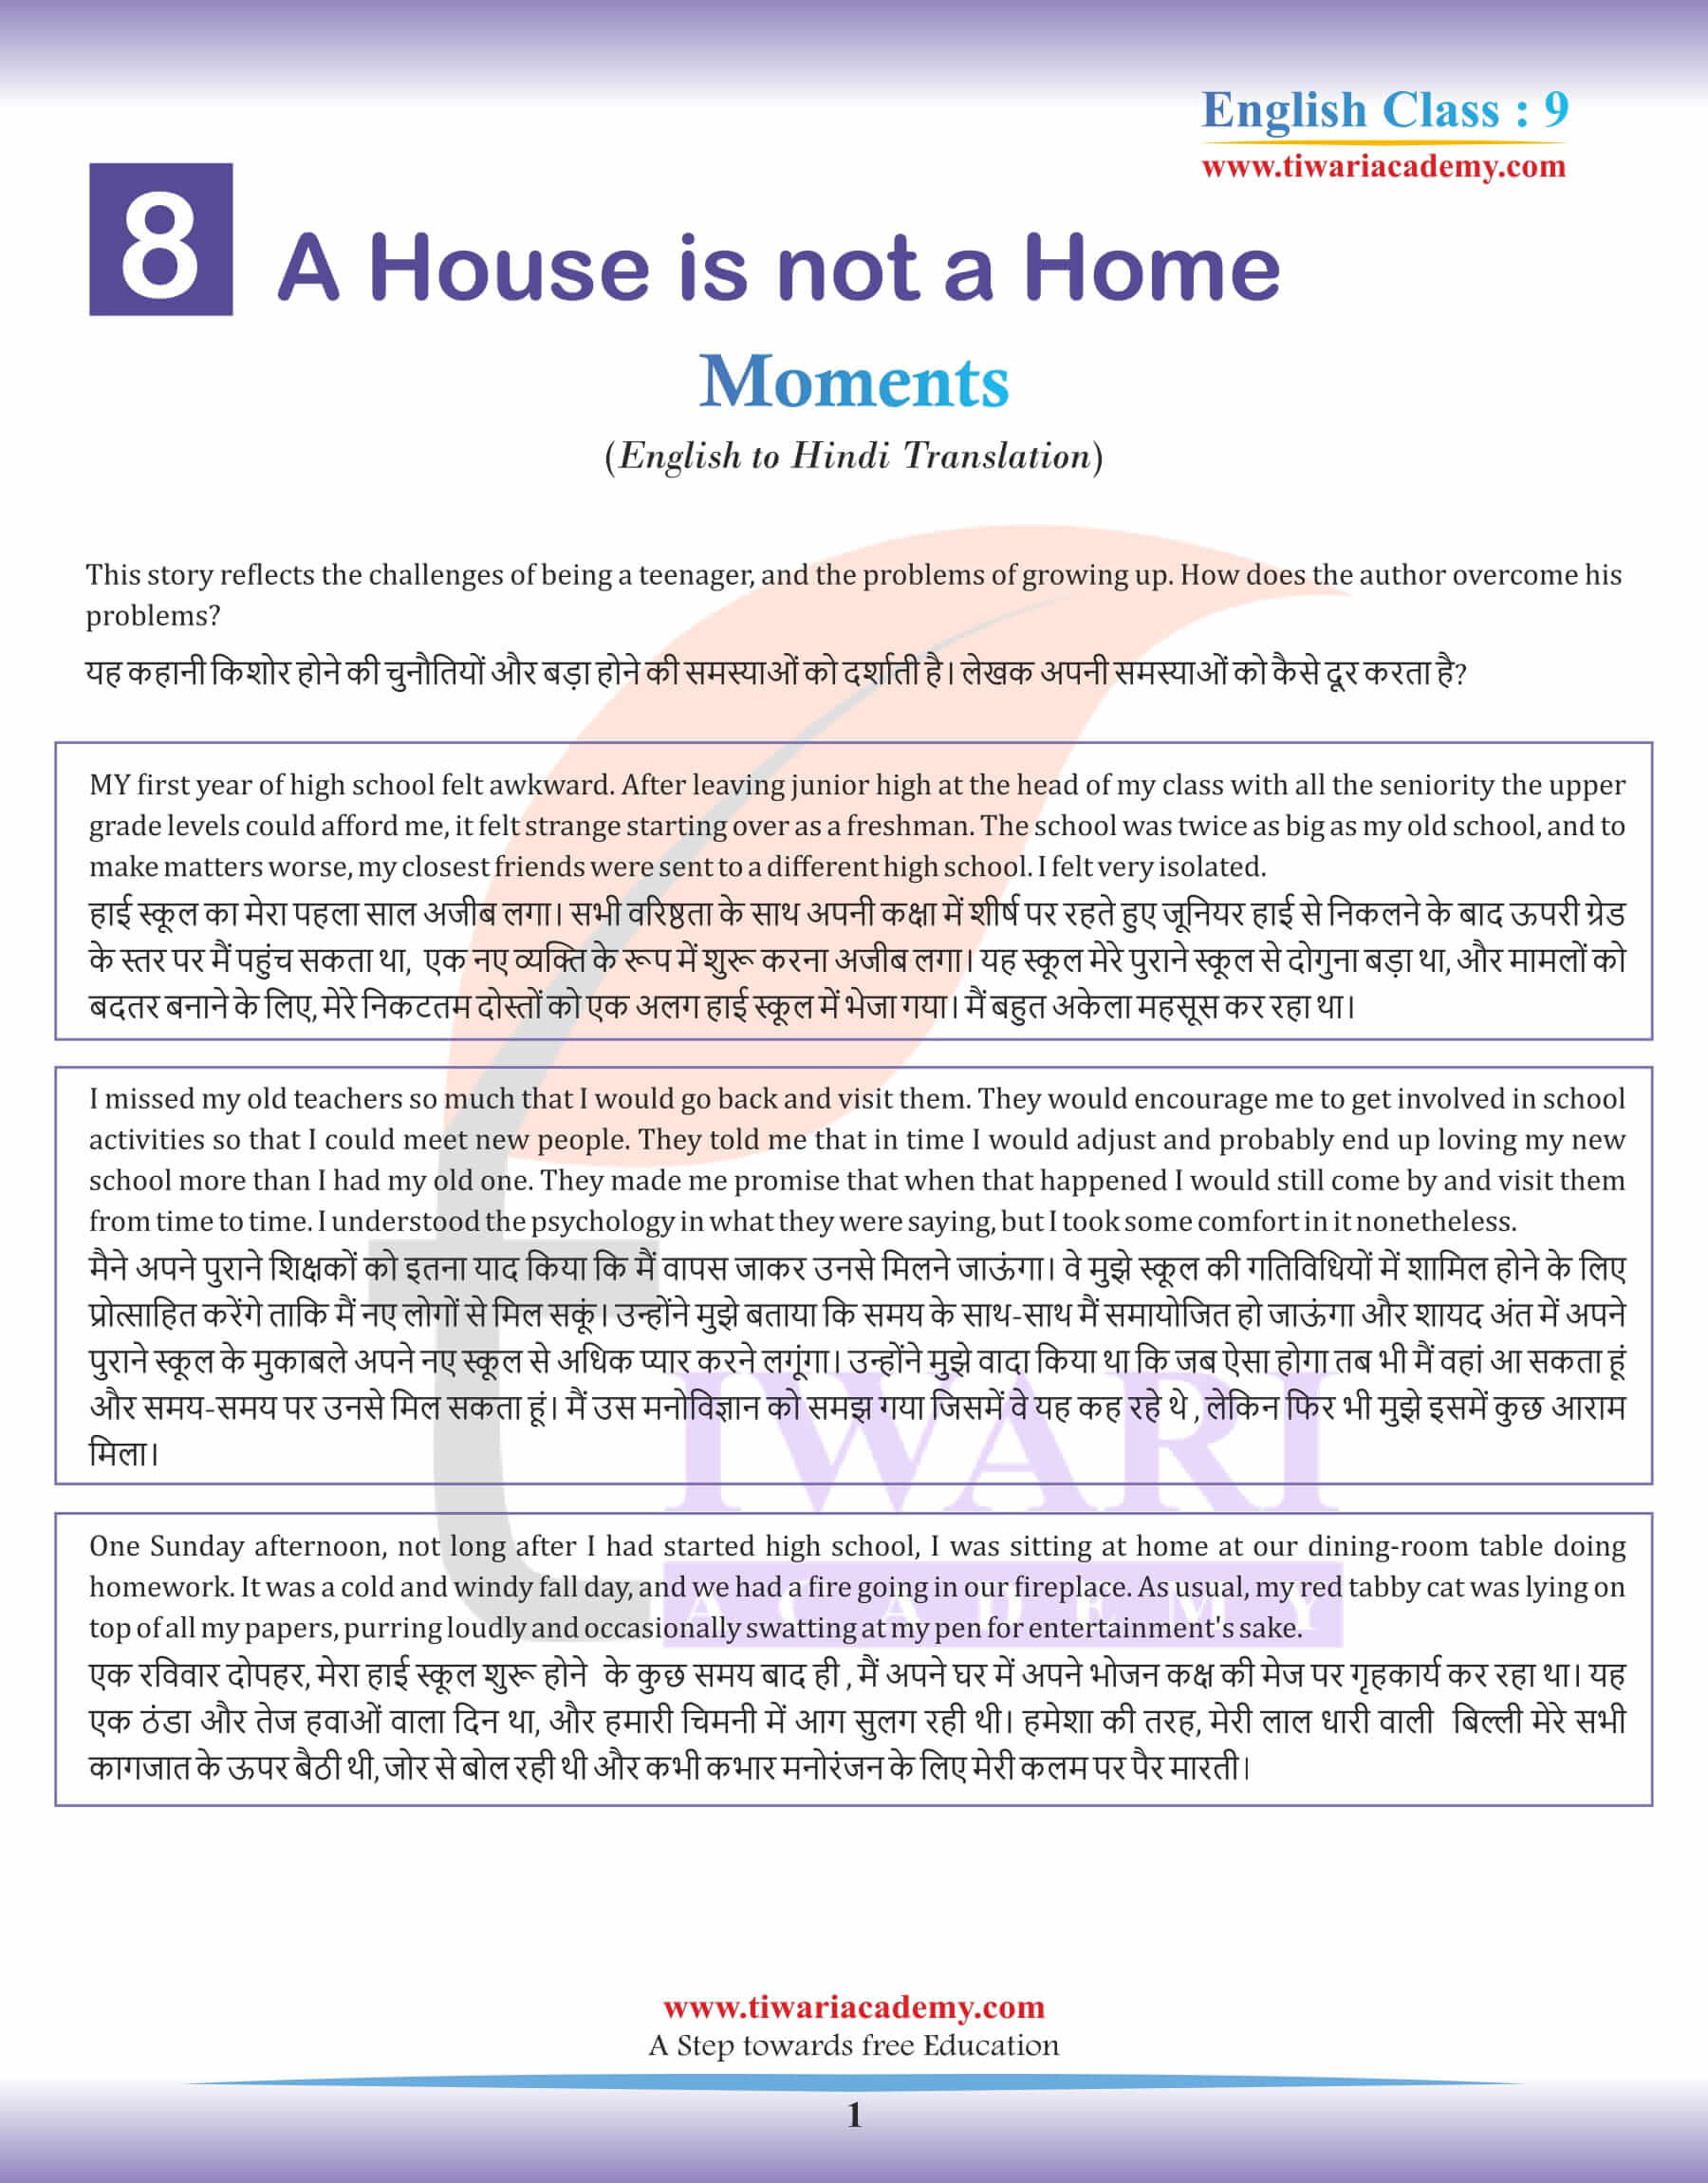 Class 9 English Moments Chapter 8 a House is Not a Home